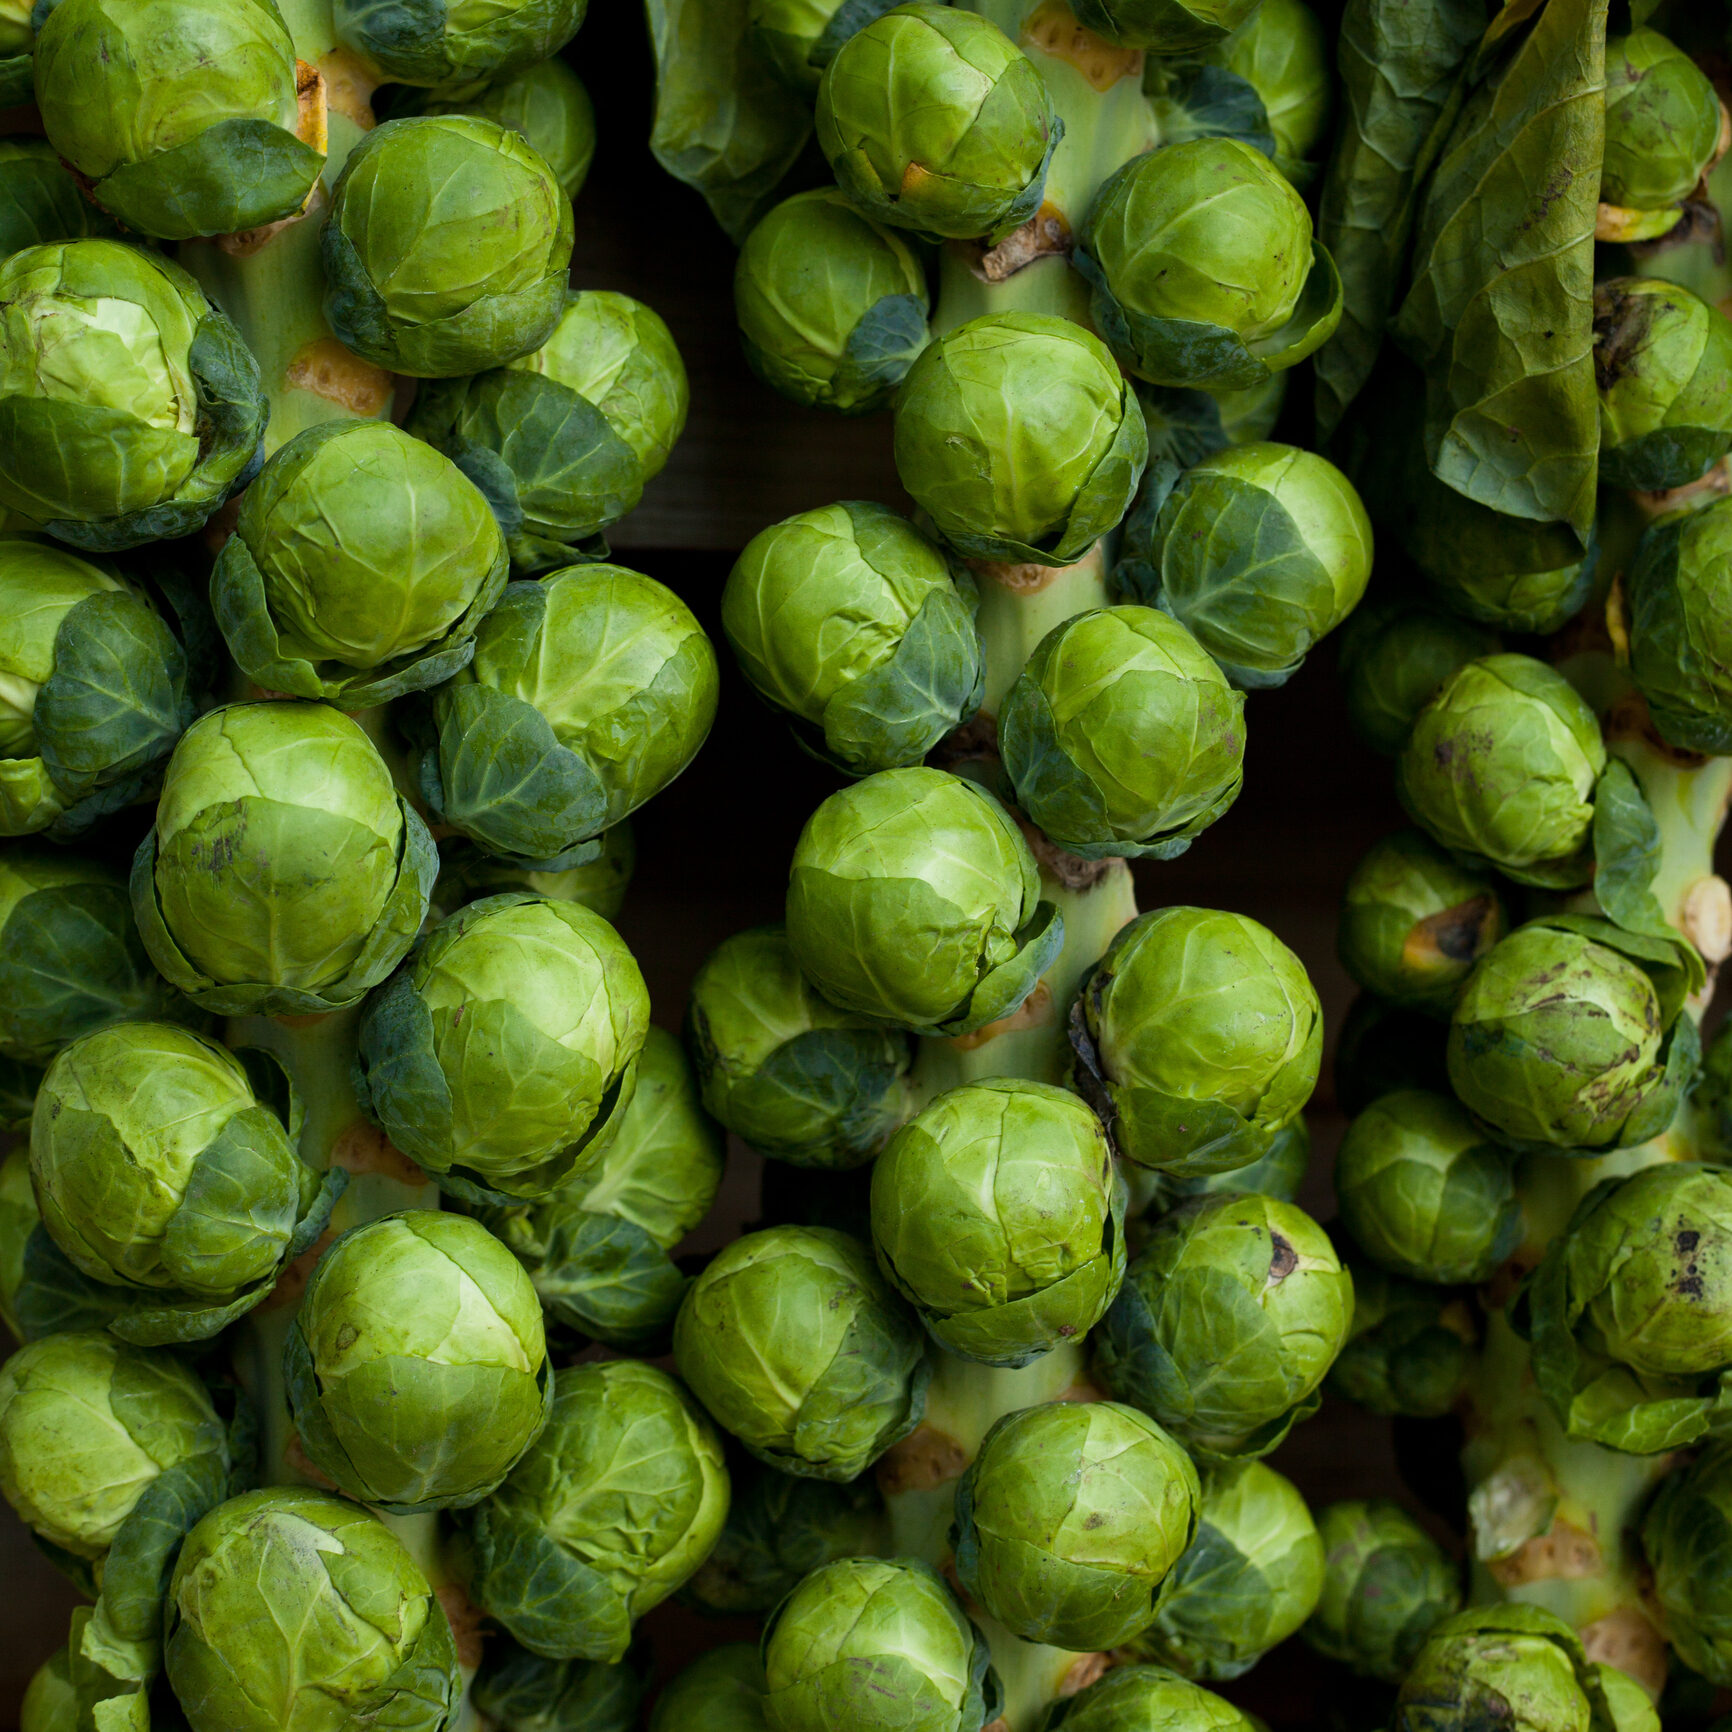 Brussel Sprouts on long sticks, kind of cabbage in farm shop, just after harvest. Traditional british meal for Christmas.